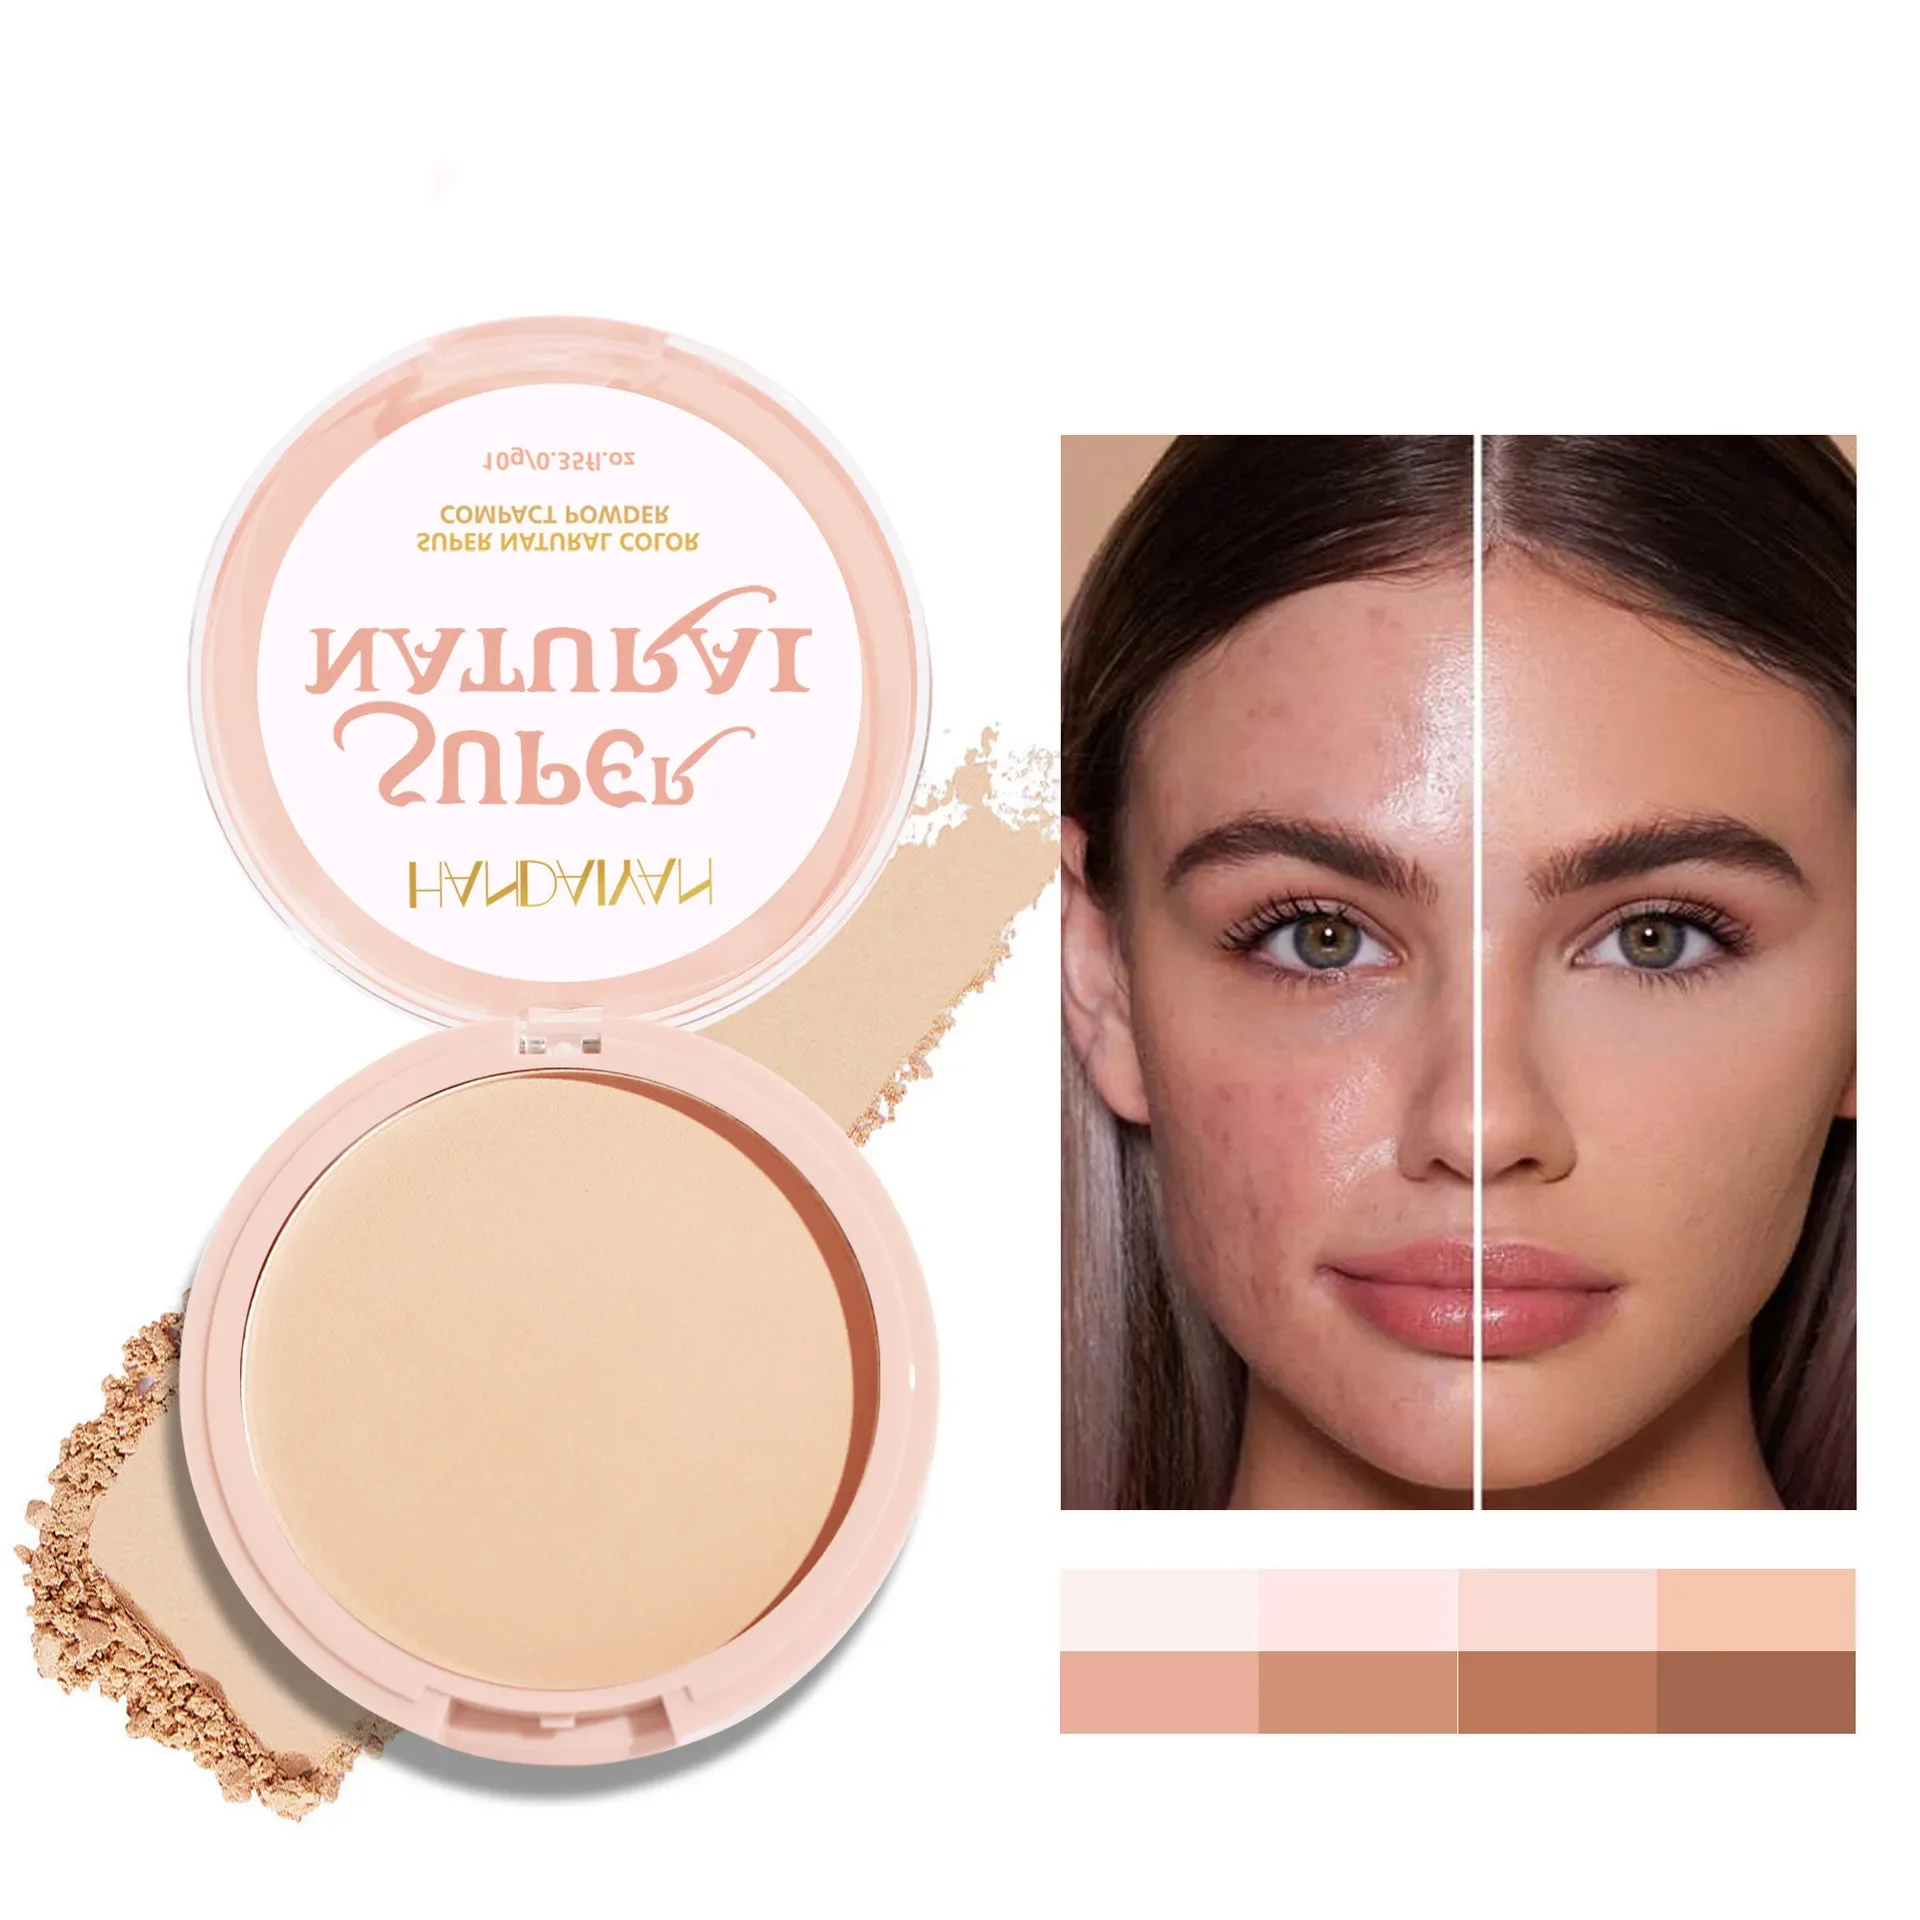 

Concealer Pressed Powder Face Setting Powder Compact Oil-Control 8 Colors Matte Smooth Finish Full Coverage Foundation Makeup